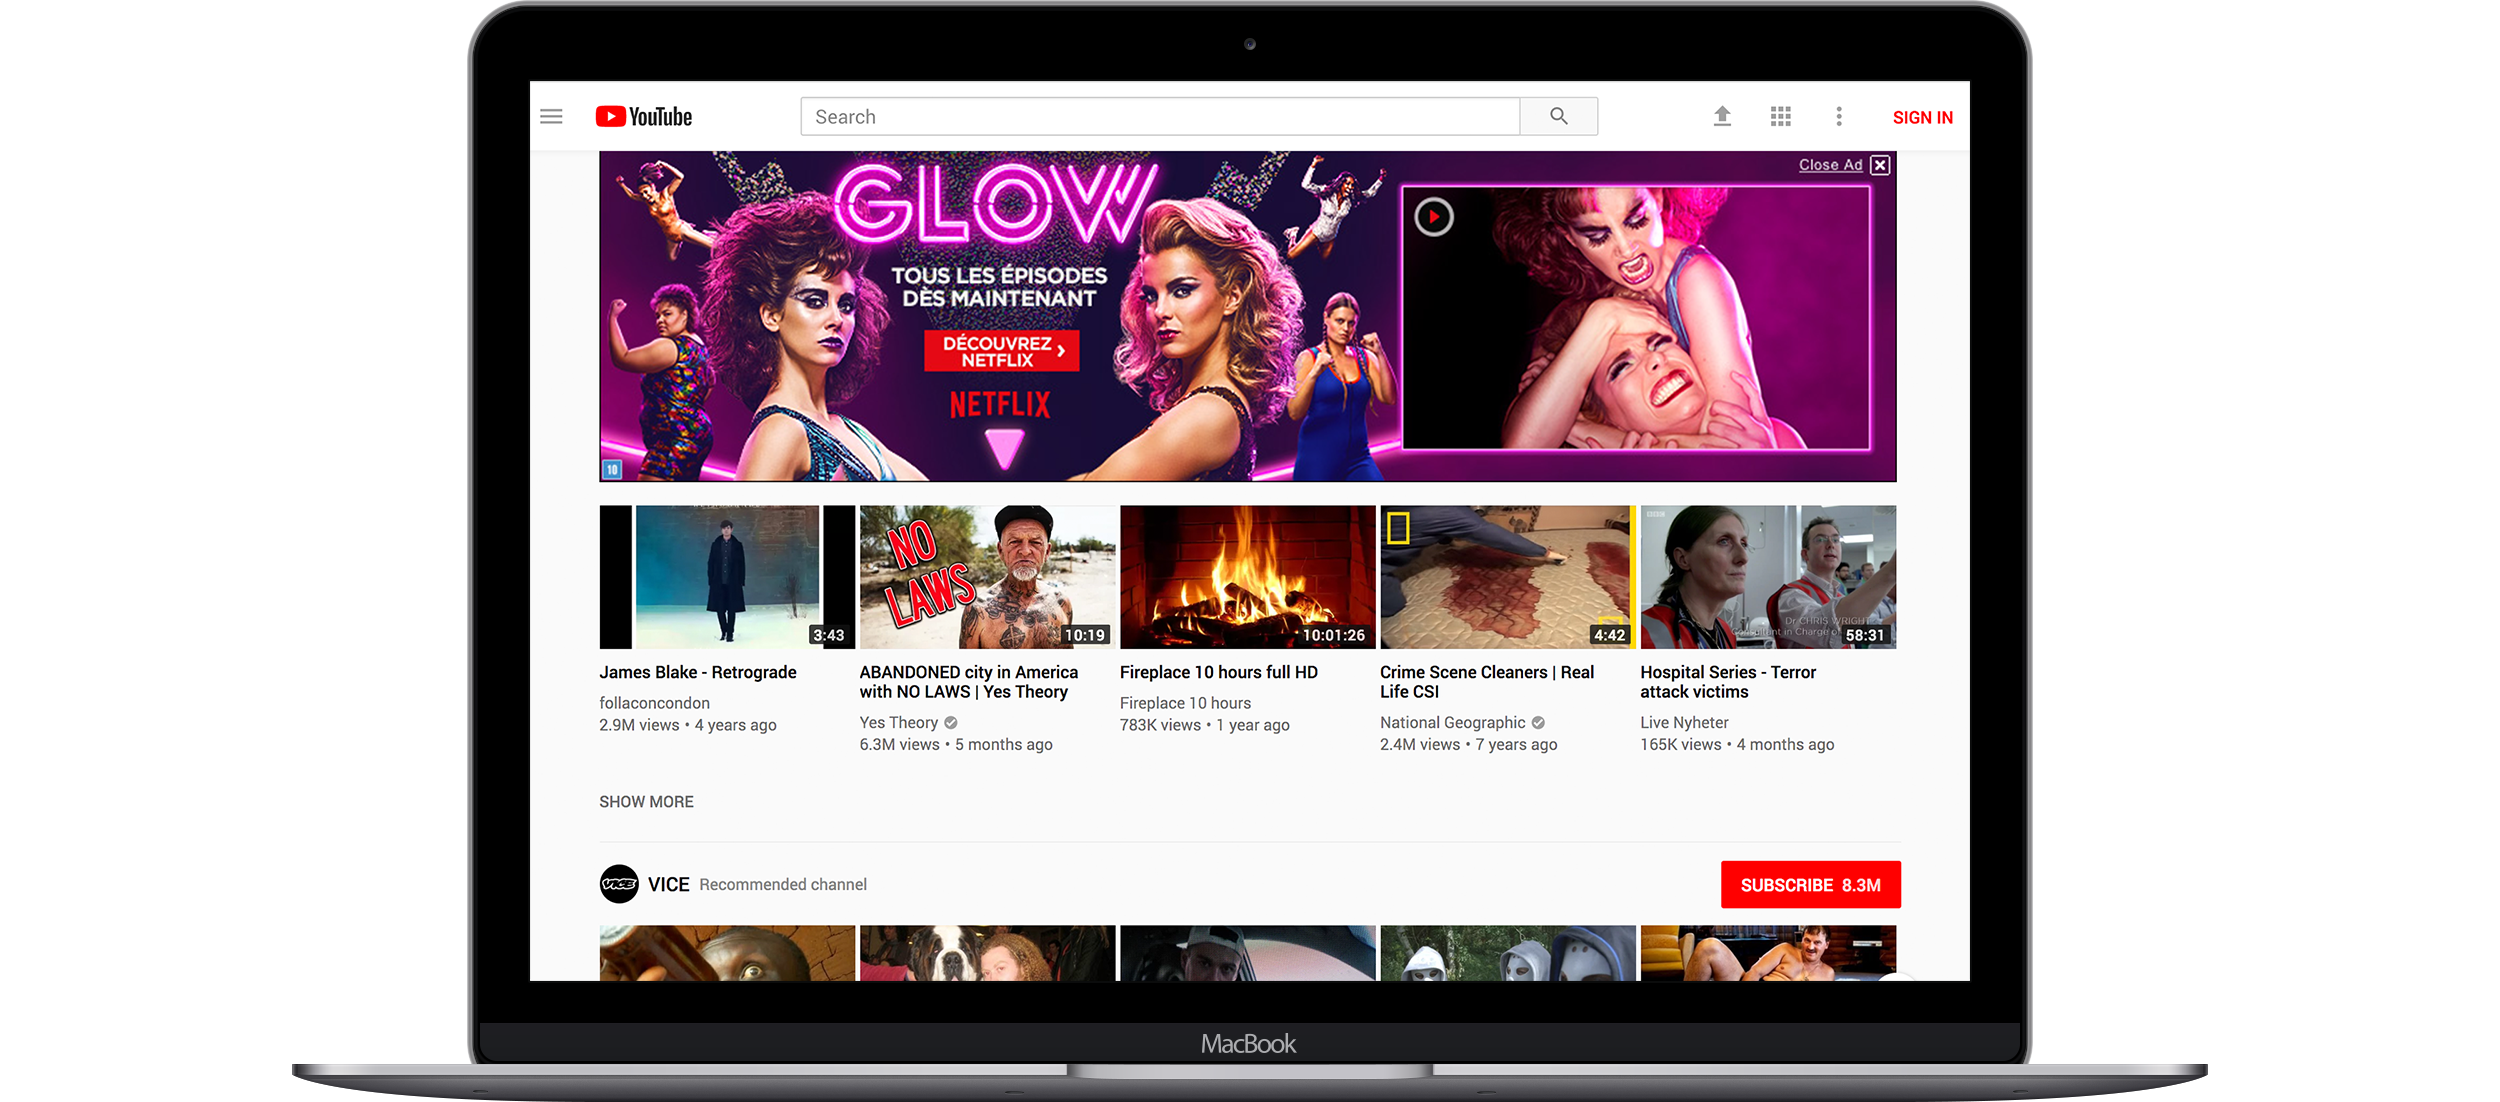 GLOW_YT_MASTHEAD_Collapsed.png